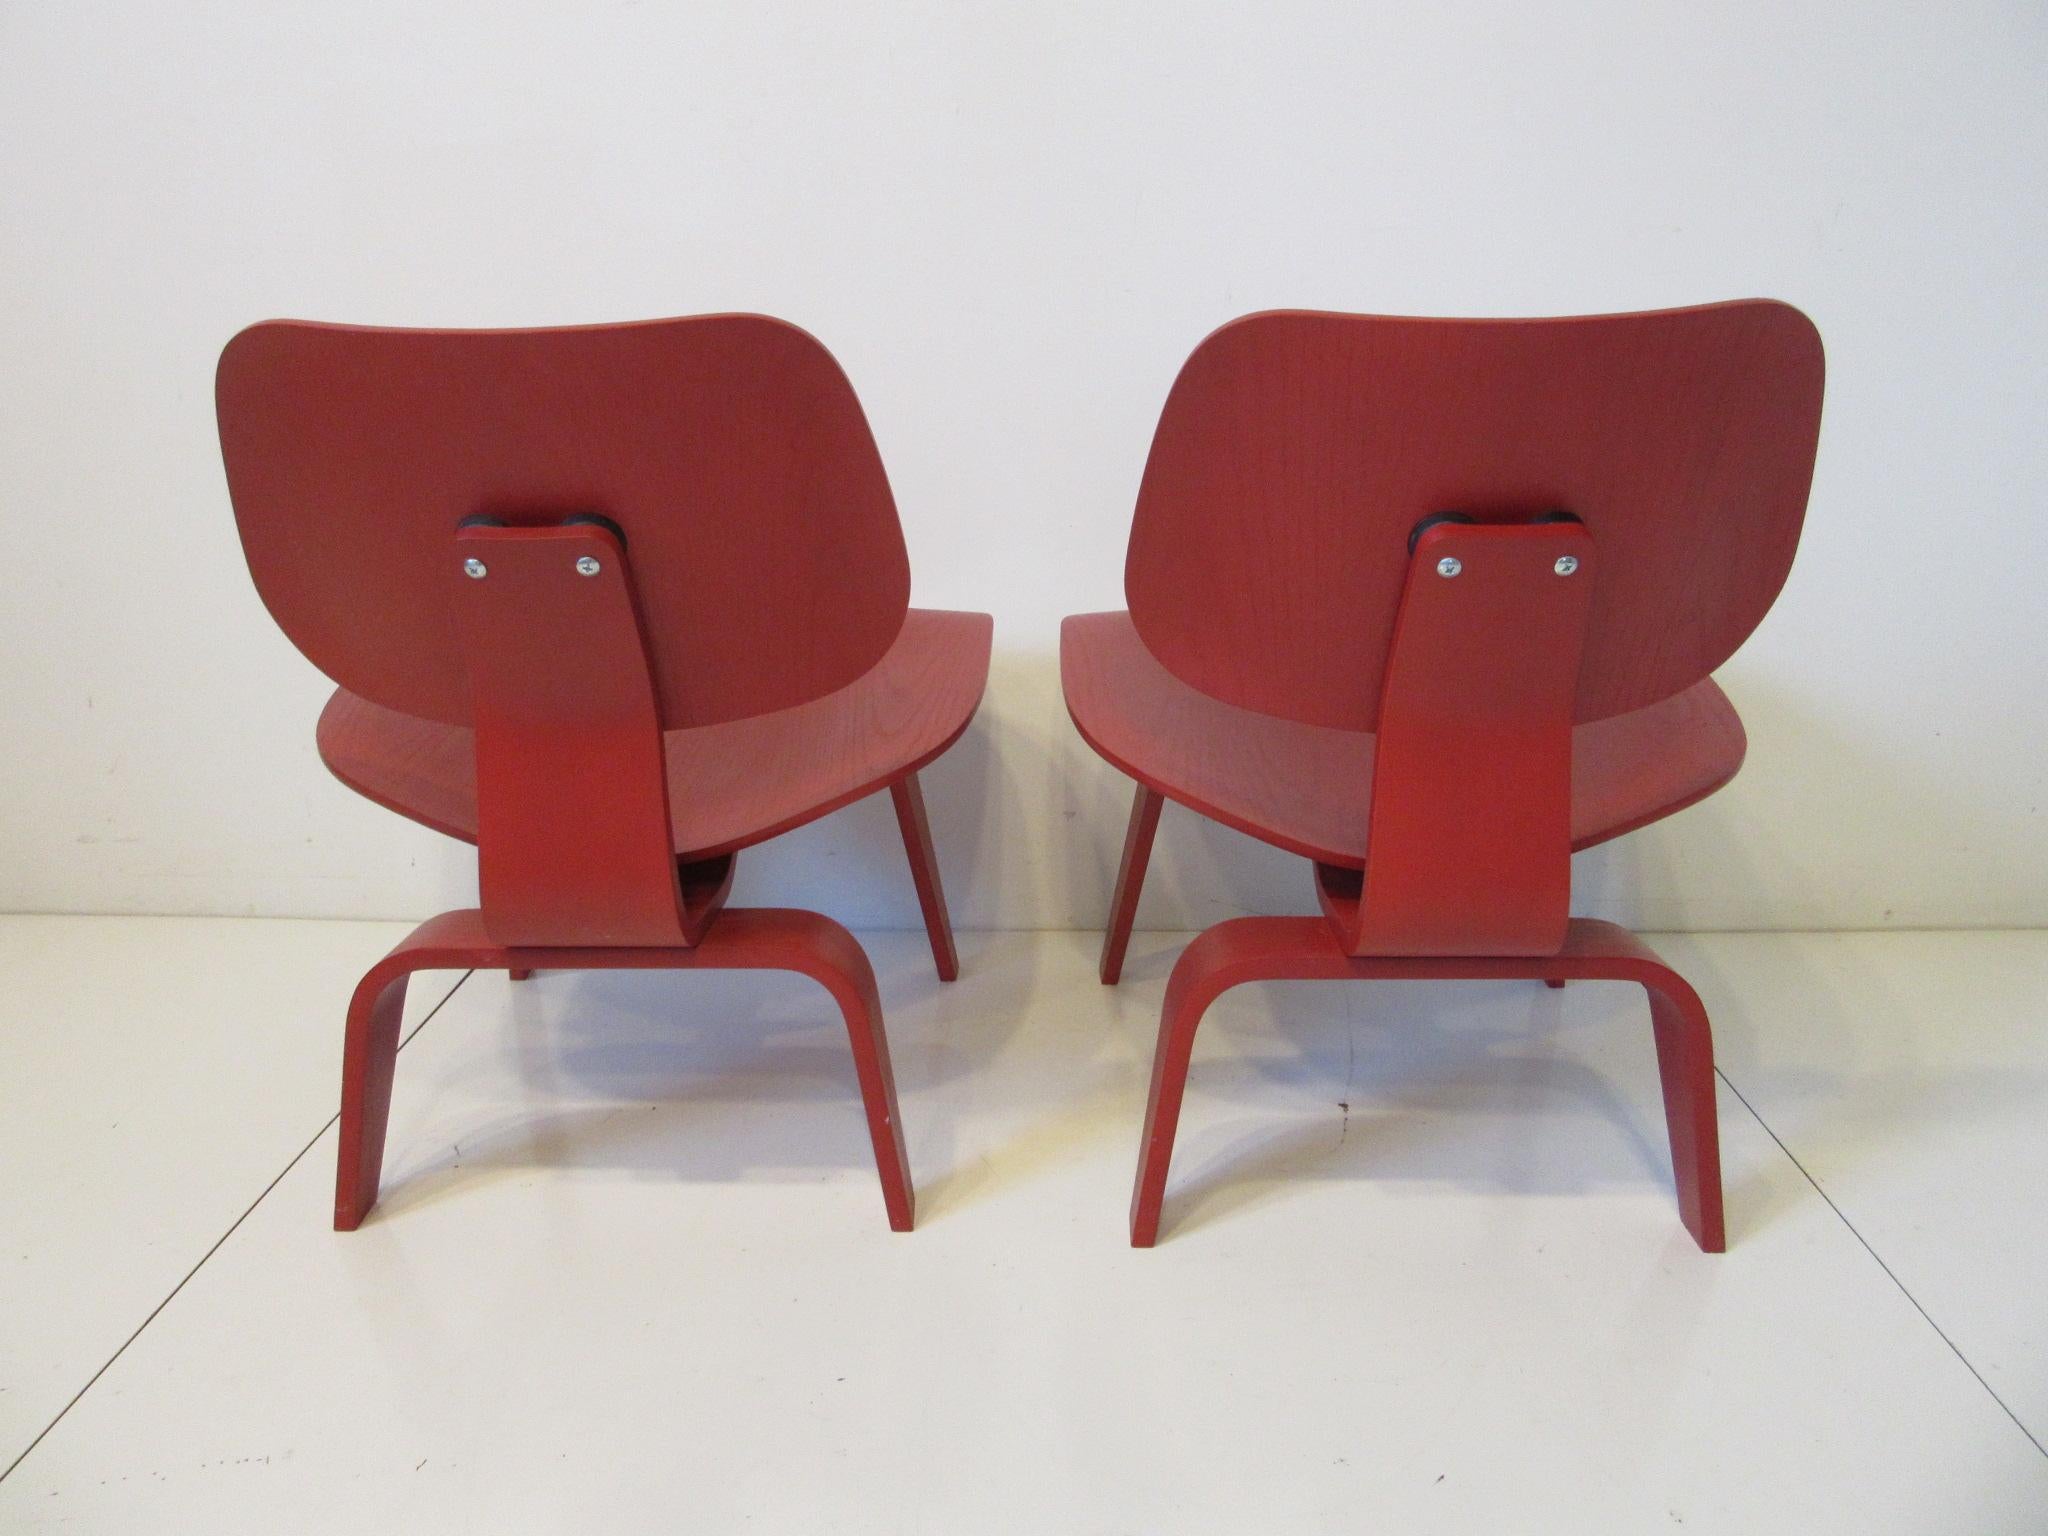 American Eames Red LCW Lounge Chairs for Herman Miller